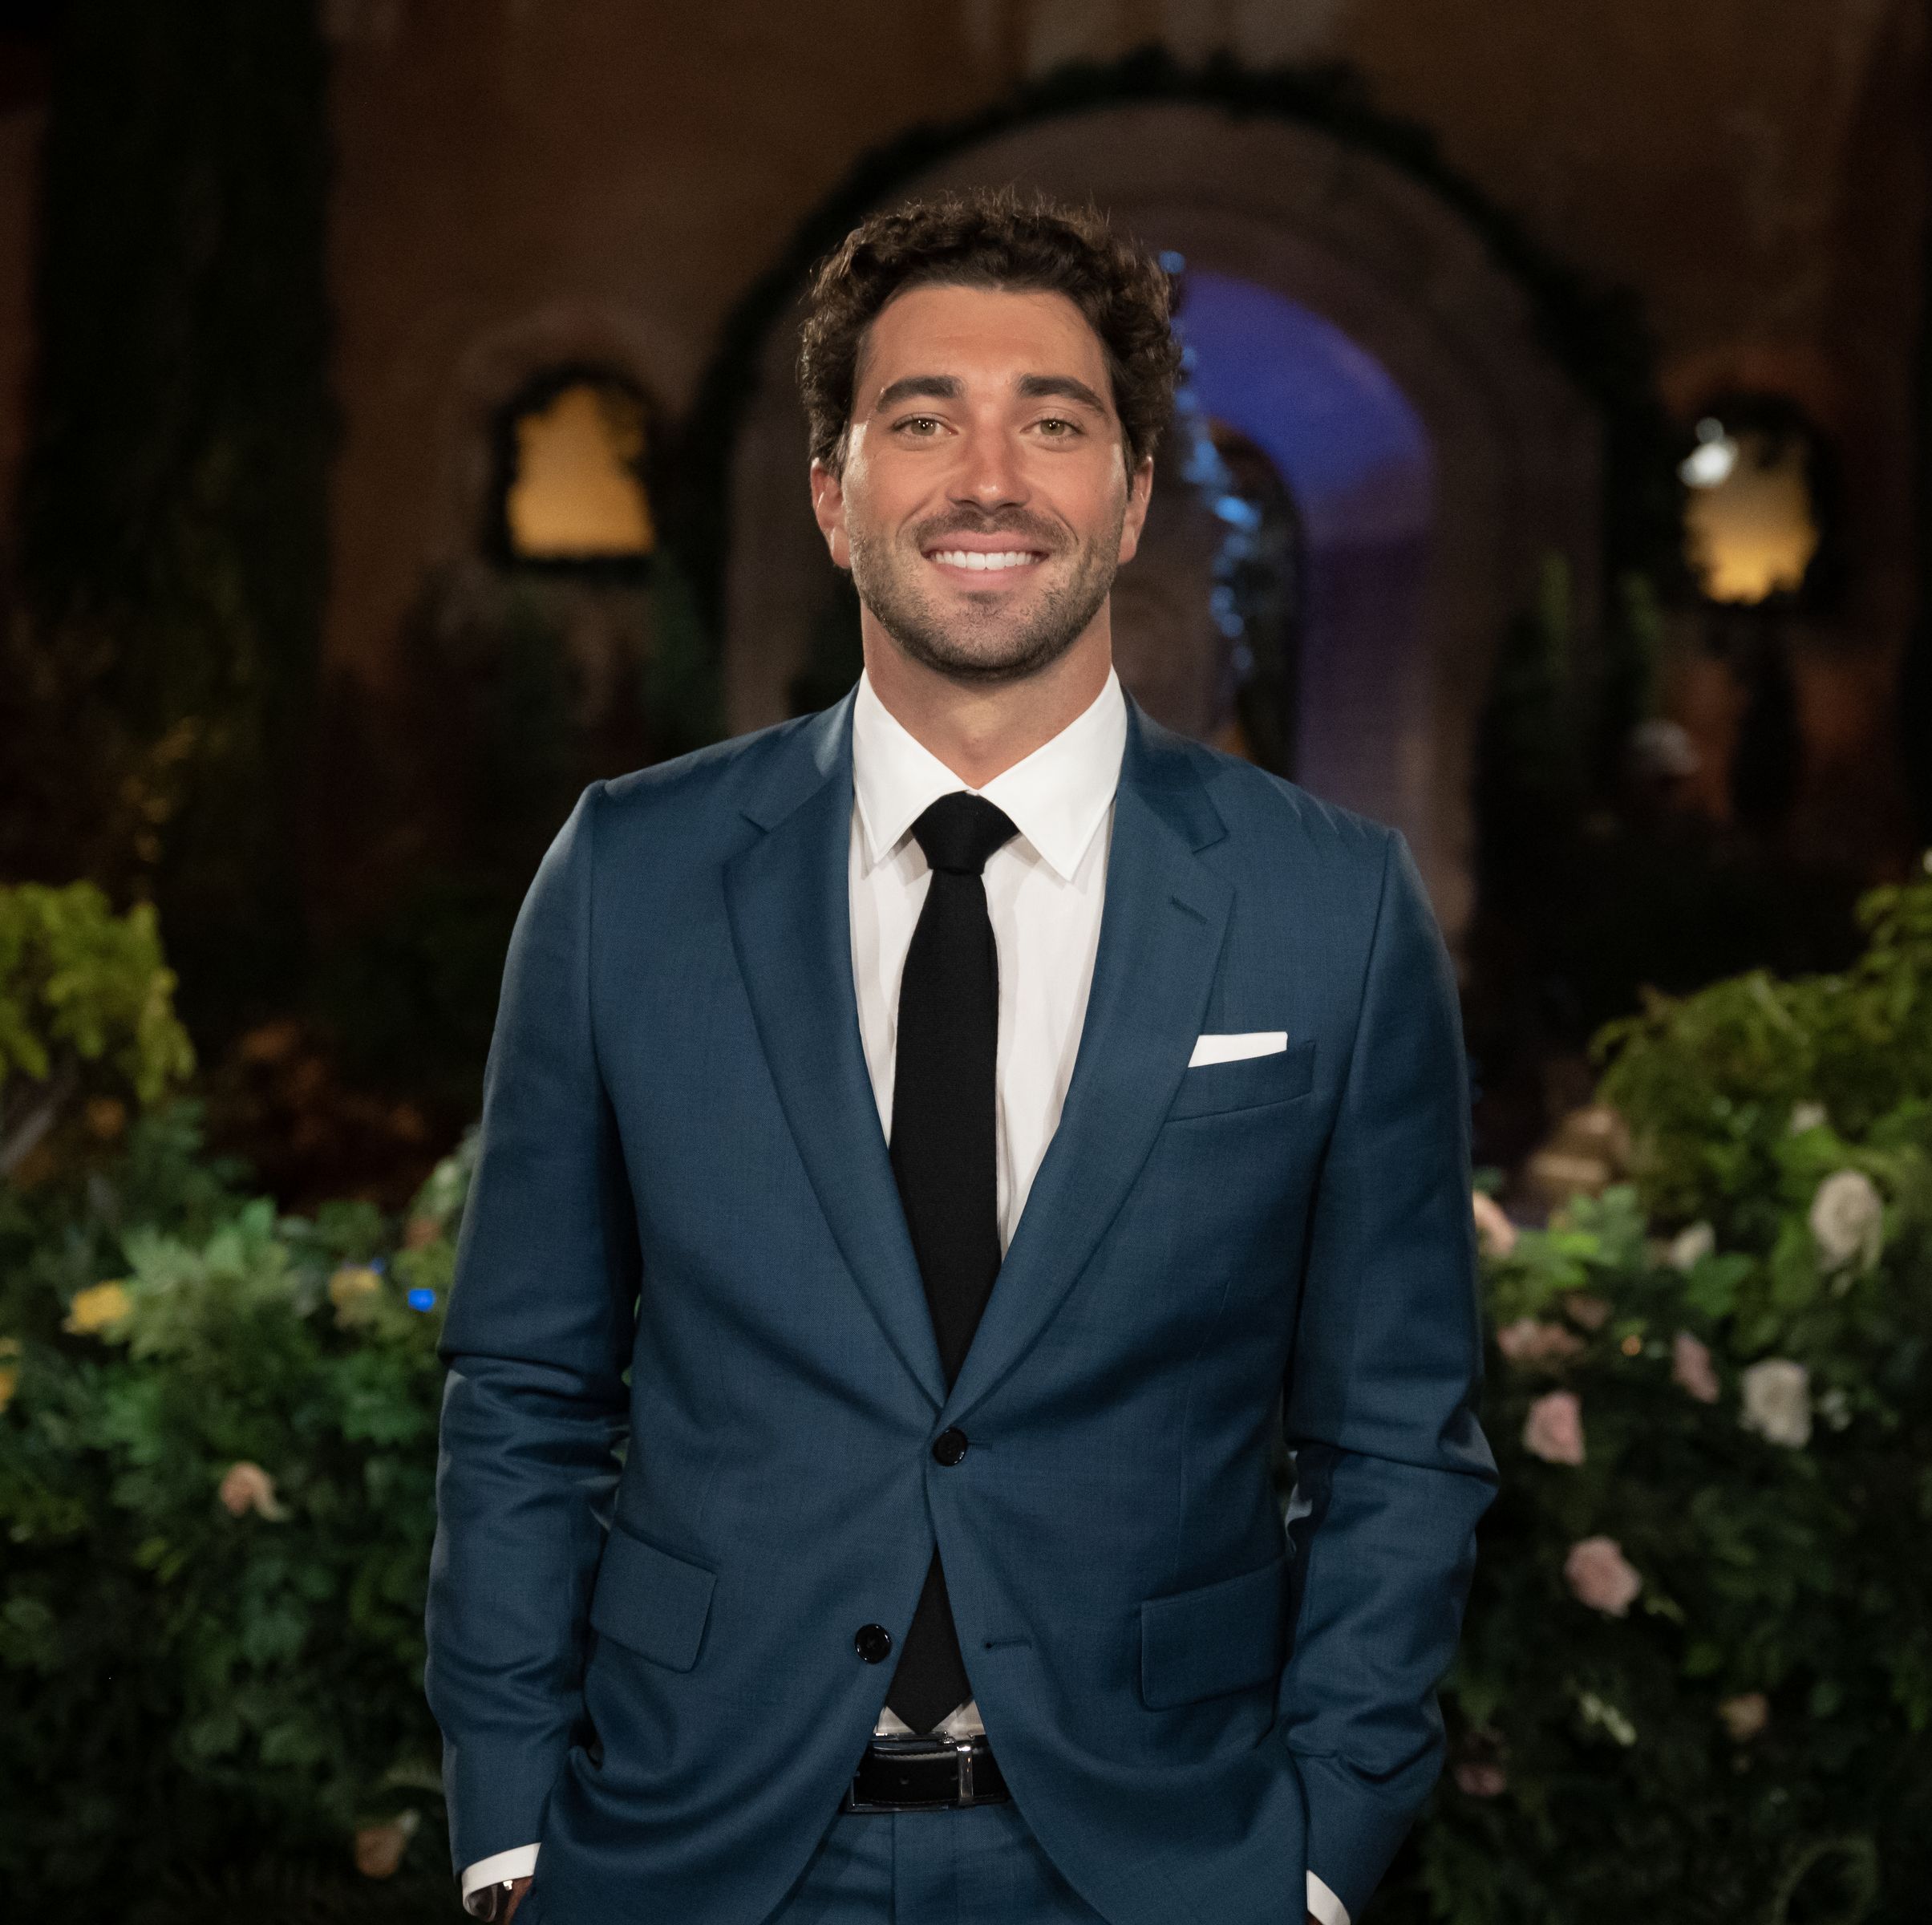 Here's When Every Episode of 'The Bachelor' Season 28 Drops